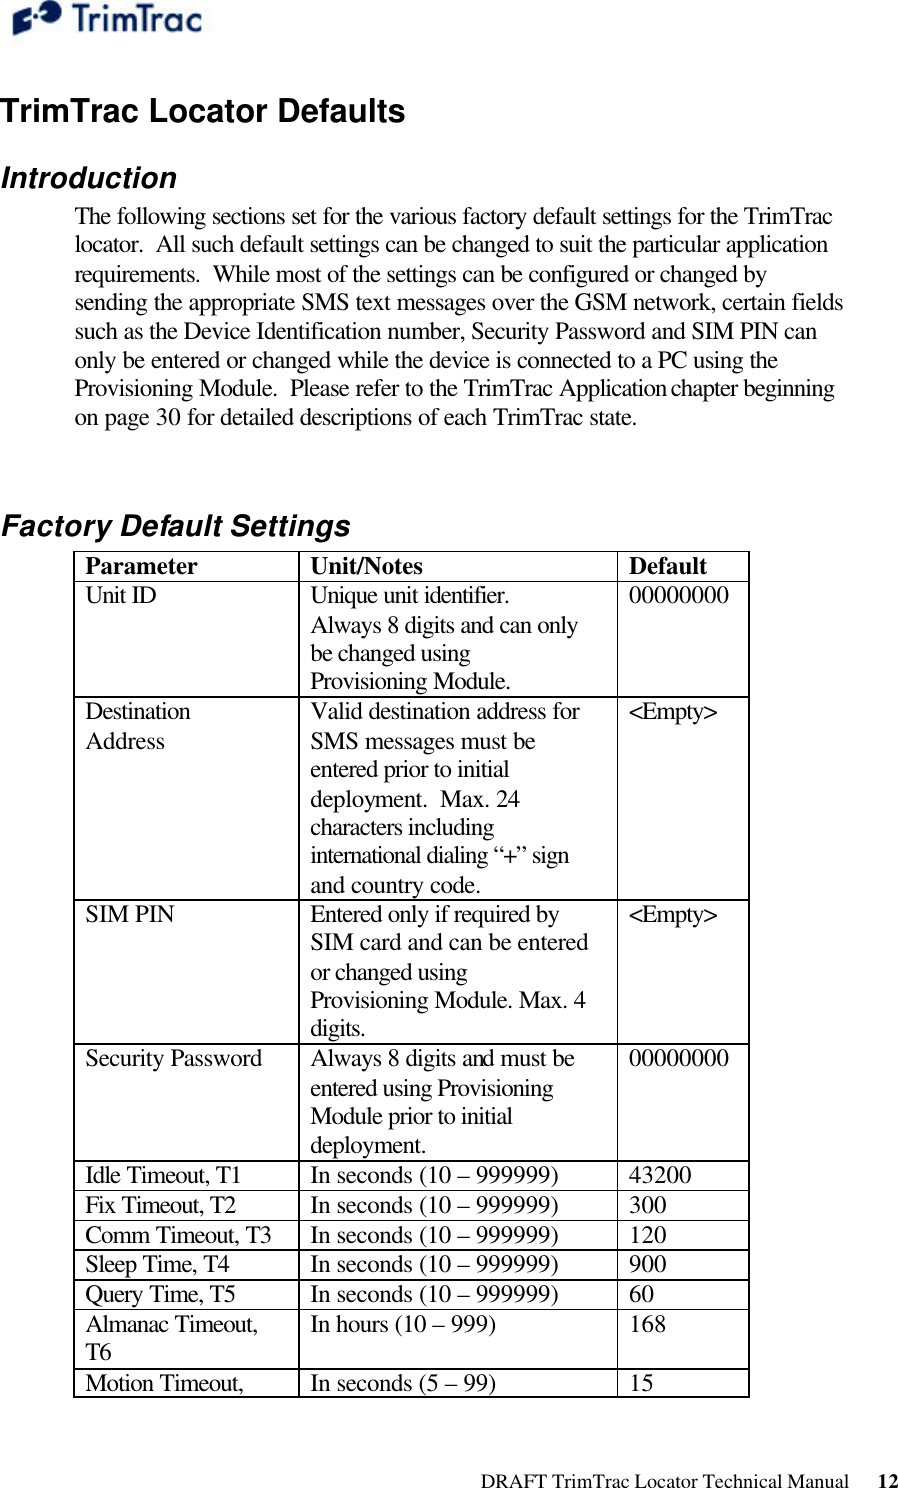  DRAFT TrimTrac Locator Technical Manual      12 TrimTrac Locator Defaults  Introduction The following sections set for the various factory default settings for the TrimTrac locator.  All such default settings can be changed to suit the particular application requirements.  While most of the settings can be configured or changed by sending the appropriate SMS text messages over the GSM network, certain fields such as the Device Identification number, Security Password and SIM PIN can only be entered or changed while the device is connected to a PC using the Provisioning Module.  Please refer to the TrimTrac Application chapter beginning on page 30 for detailed descriptions of each TrimTrac state.  Factory Default Settings Parameter Unit/Notes Default Unit ID Unique unit identifier.  Always 8 digits and can only be changed using Provisioning Module. 00000000 Destination Address Valid destination address for SMS messages must be entered prior to initial deployment.  Max. 24 characters including international dialing “+” sign and country code. &lt;Empty&gt; SIM PIN Entered only if required by SIM card and can be entered or changed using Provisioning Module. Max. 4 digits. &lt;Empty&gt; Security Password Always 8 digits and must be entered using Provisioning Module prior to initial deployment. 00000000 Idle Timeout, T1 In seconds (10 – 999999)  43200 Fix Timeout, T2 In seconds (10 – 999999)  300 Comm Timeout, T3  In seconds (10 – 999999)  120 Sleep Time, T4 In seconds (10 – 999999)  900 Query Time, T5 In seconds (10 – 999999)  60 Almanac Timeout, T6 In hours (10 – 999)  168 Motion Timeout, In seconds (5 – 99)  15 